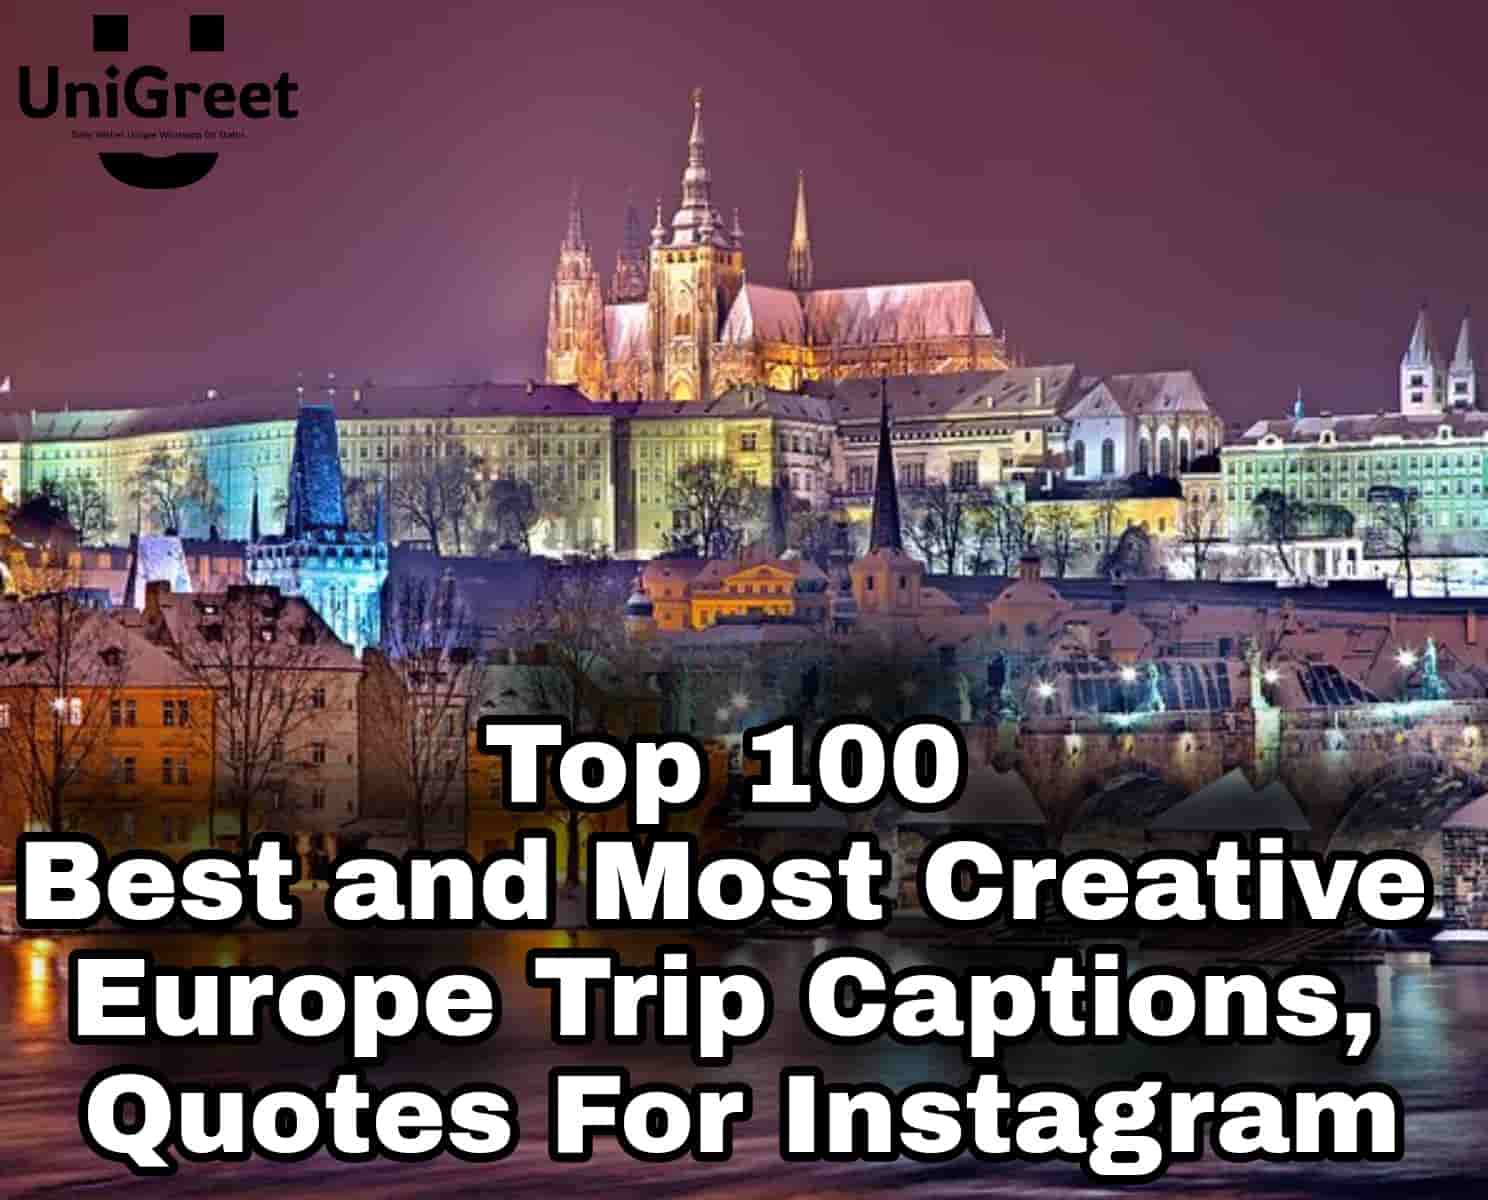 Europe Trip Captions, Quotes For Instagram